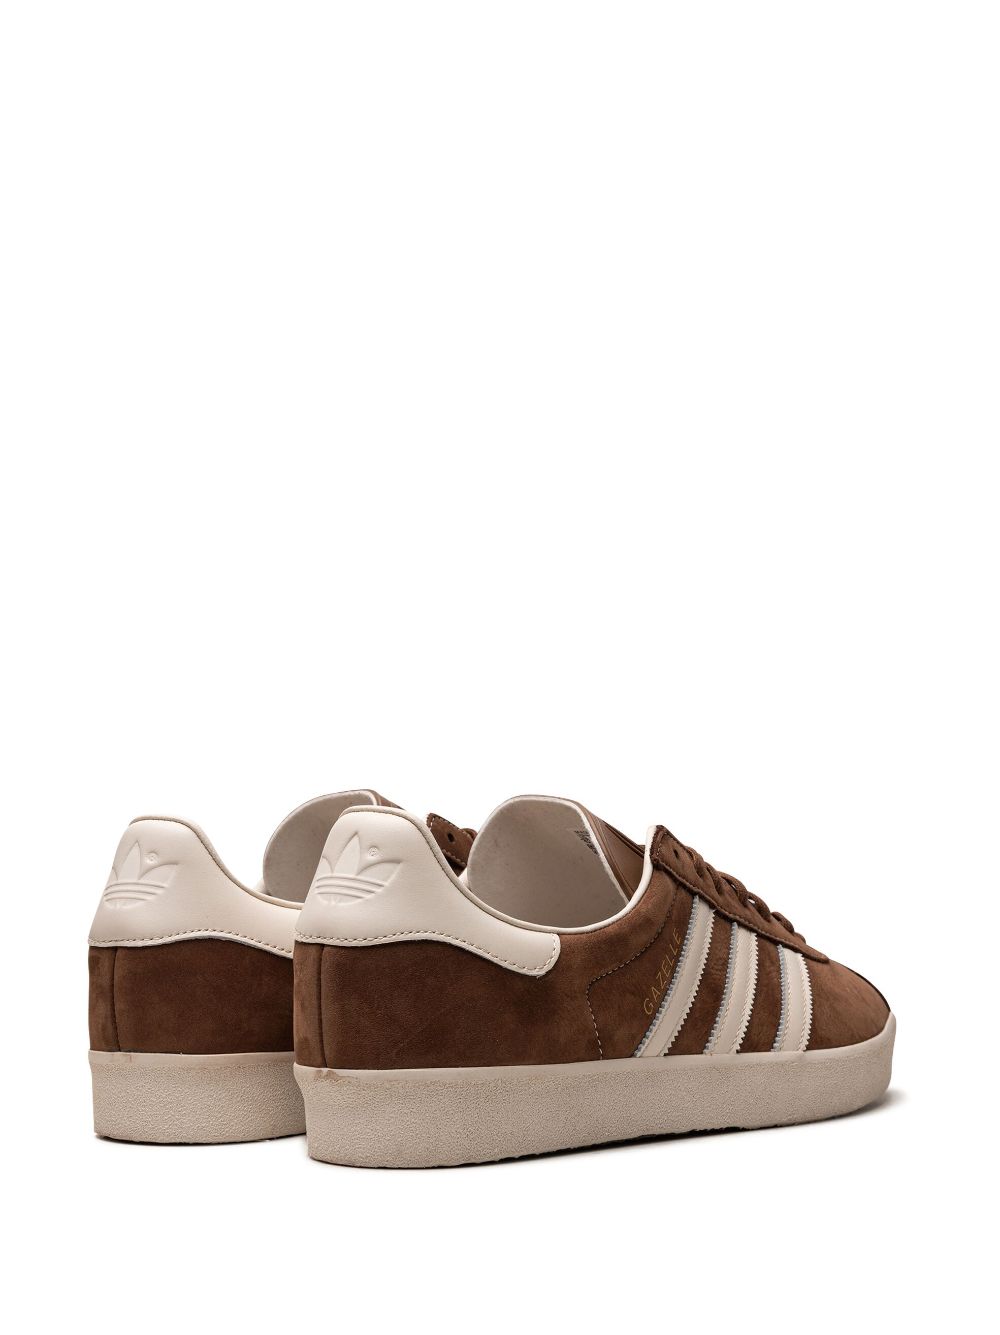 Shop Adidas Originals Gazelle 3-stripes Leather Sneakers In Brown